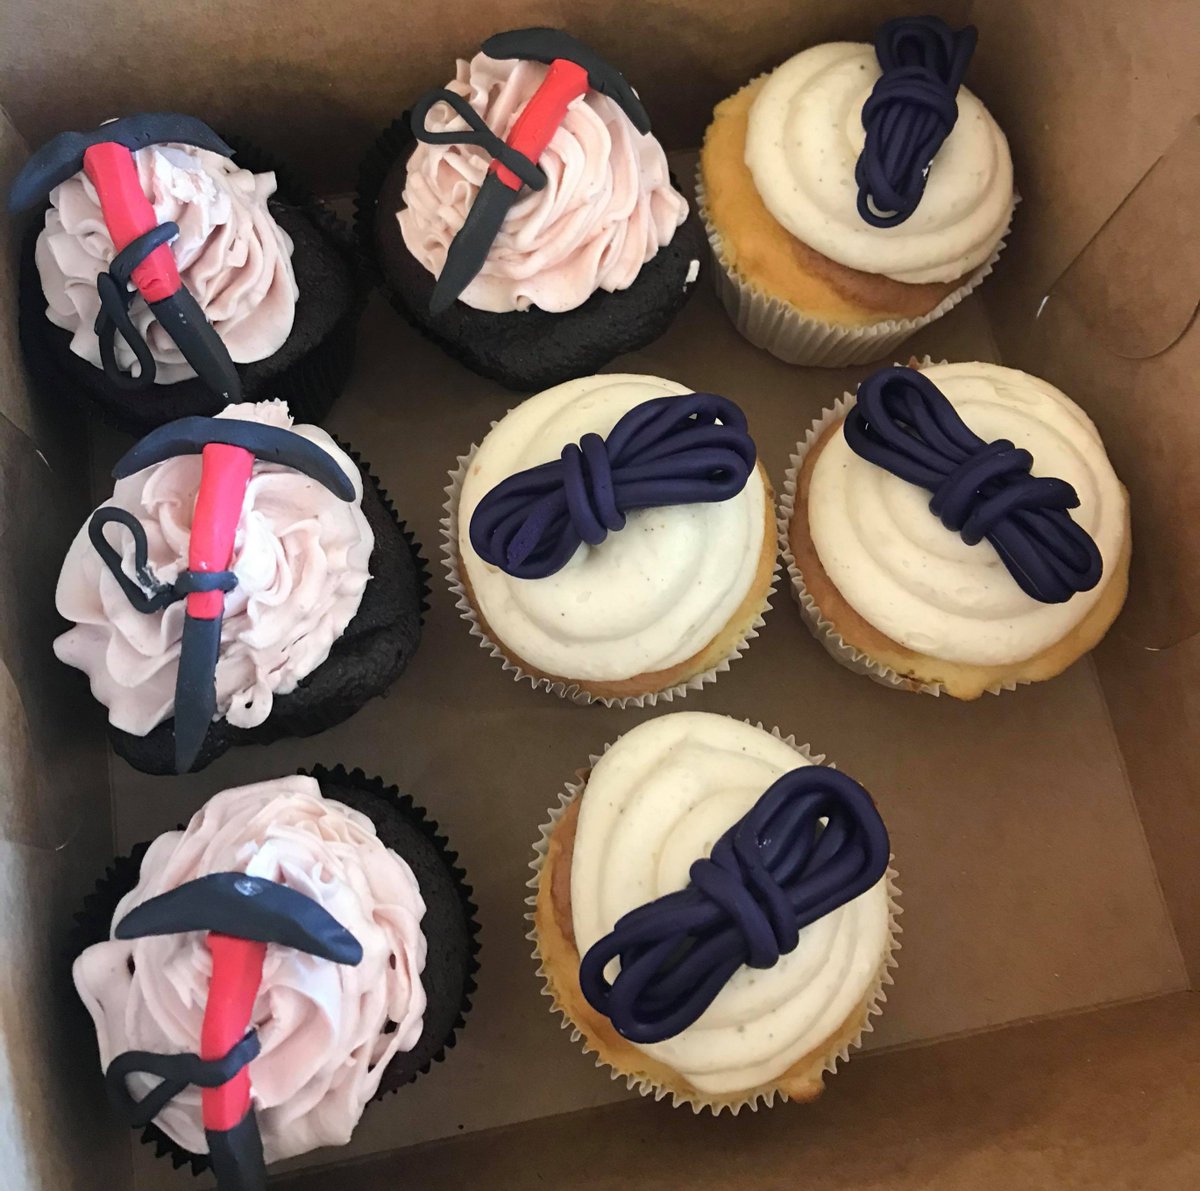 What do you get a climber for a birthday -- Cupcakes and the right gear of course.  #cupcakes #barre #climbers #climbinggear #barre #centralvermont